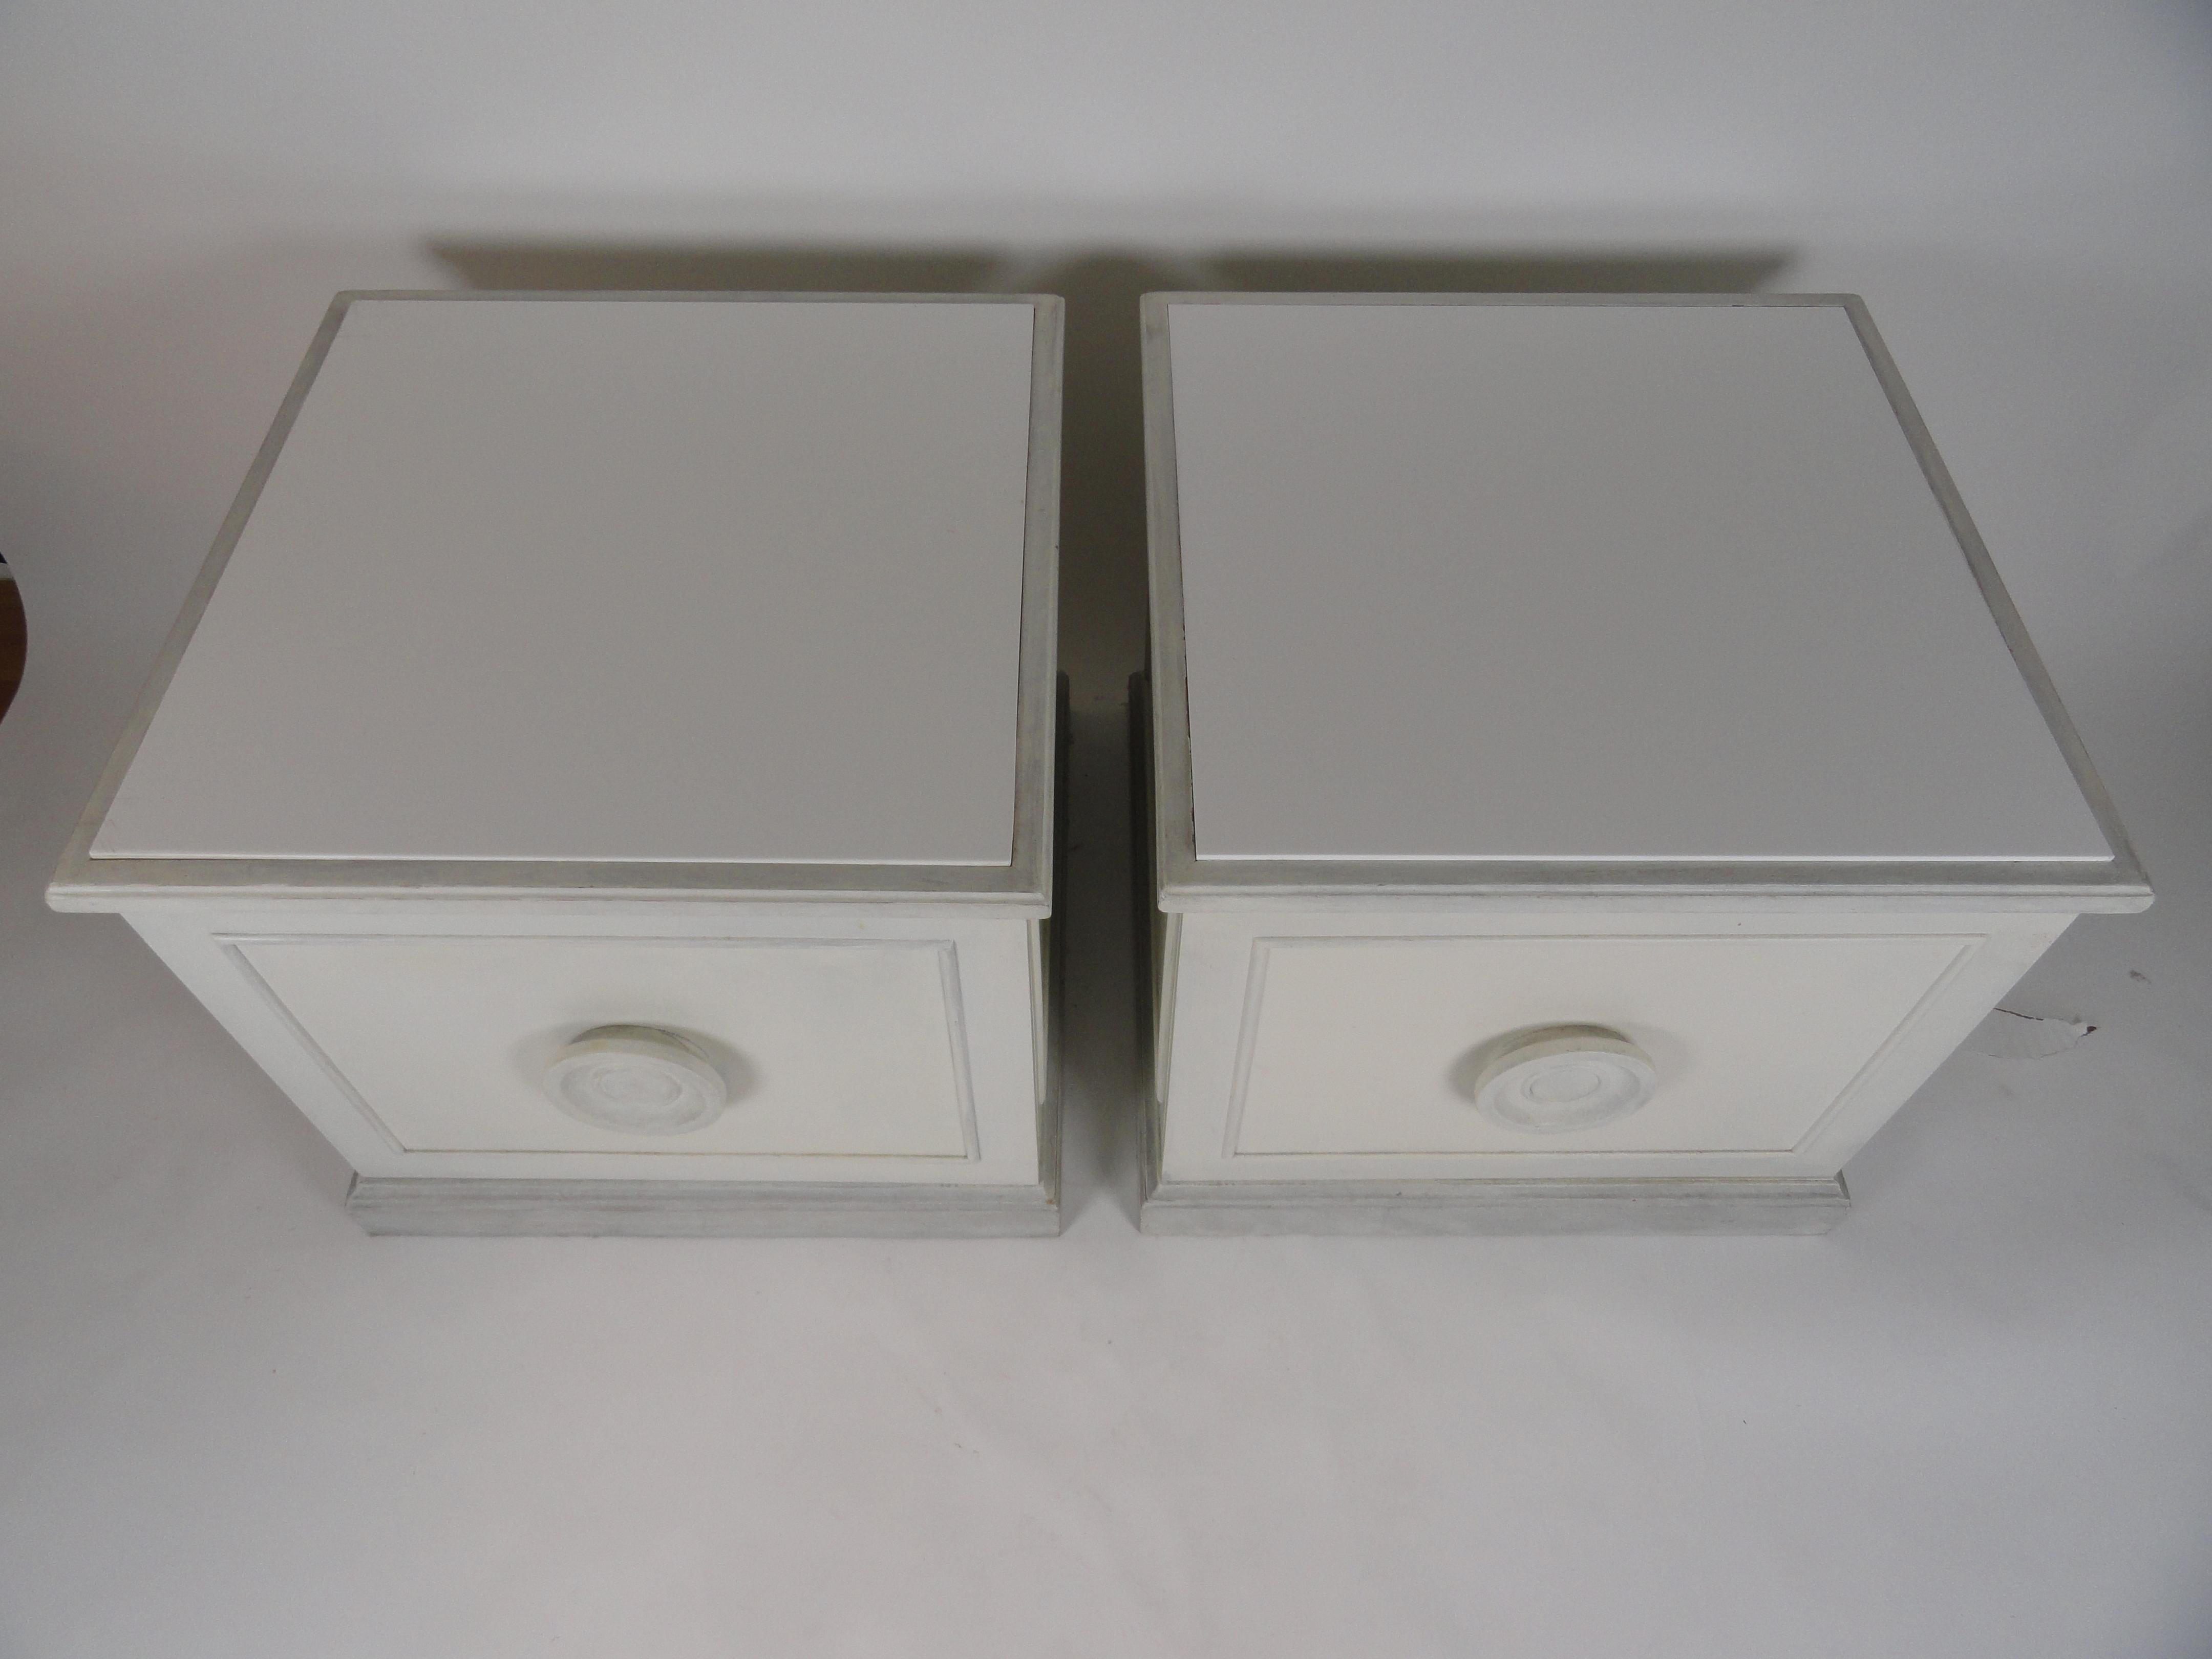 Pair of neoclassic style white painted end tables of wood with large storage capacity.
White painted pull on front. Picture frame molding on front and one side. Doors open opposite to one another.
Sturdy, heavy pieces. Single adjustable shelf